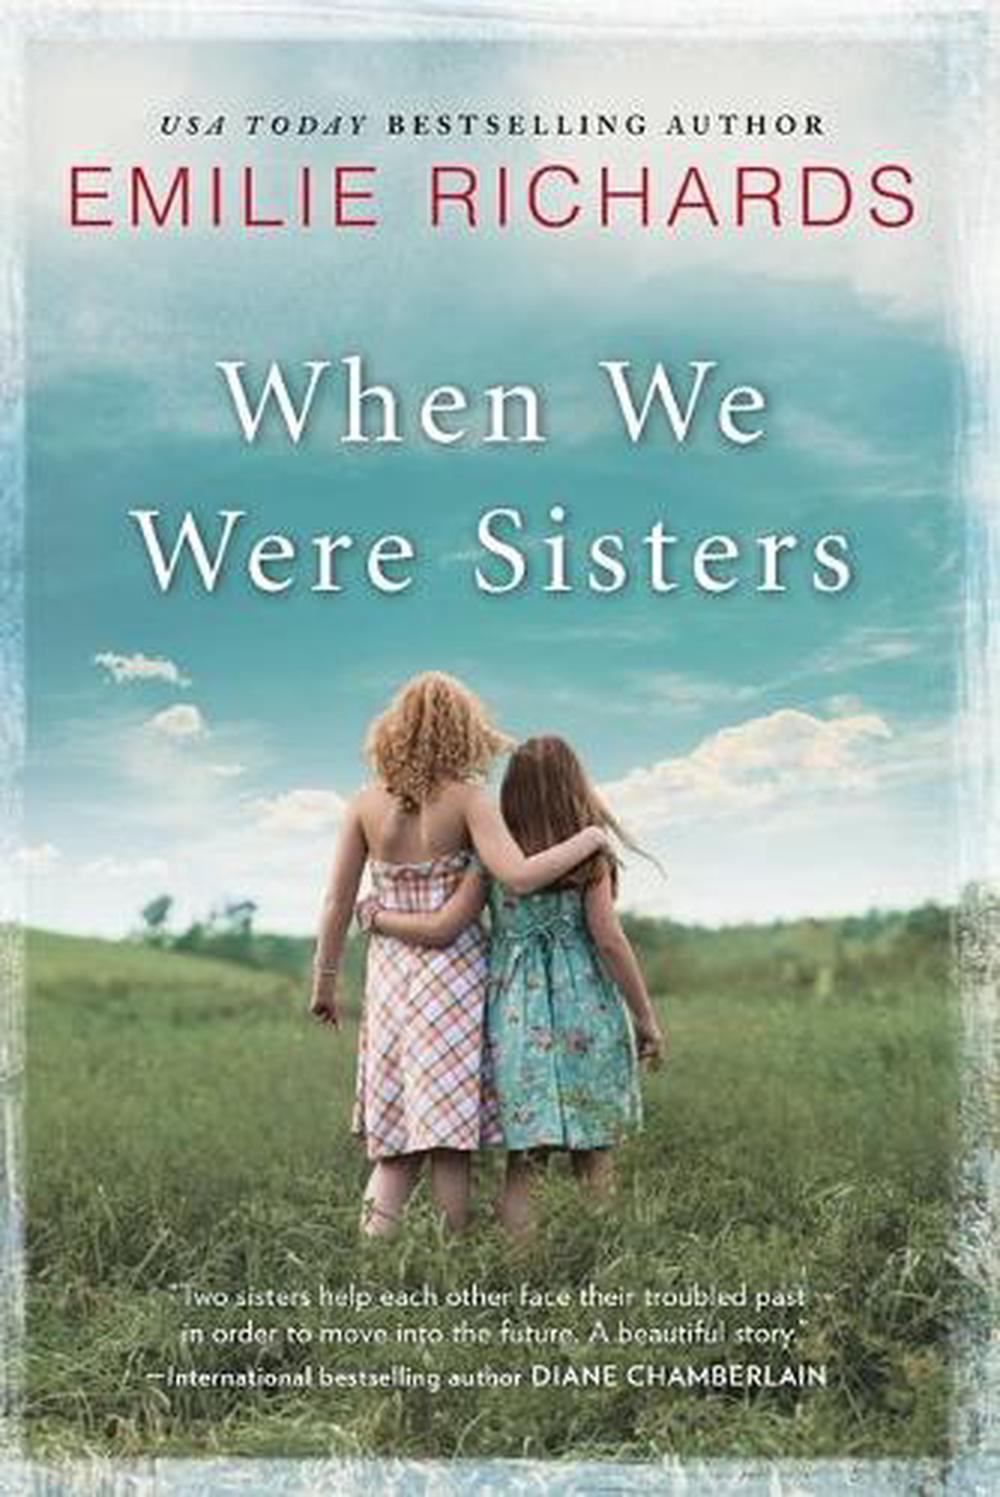 When We Were Sisters by Fatimah Asghar